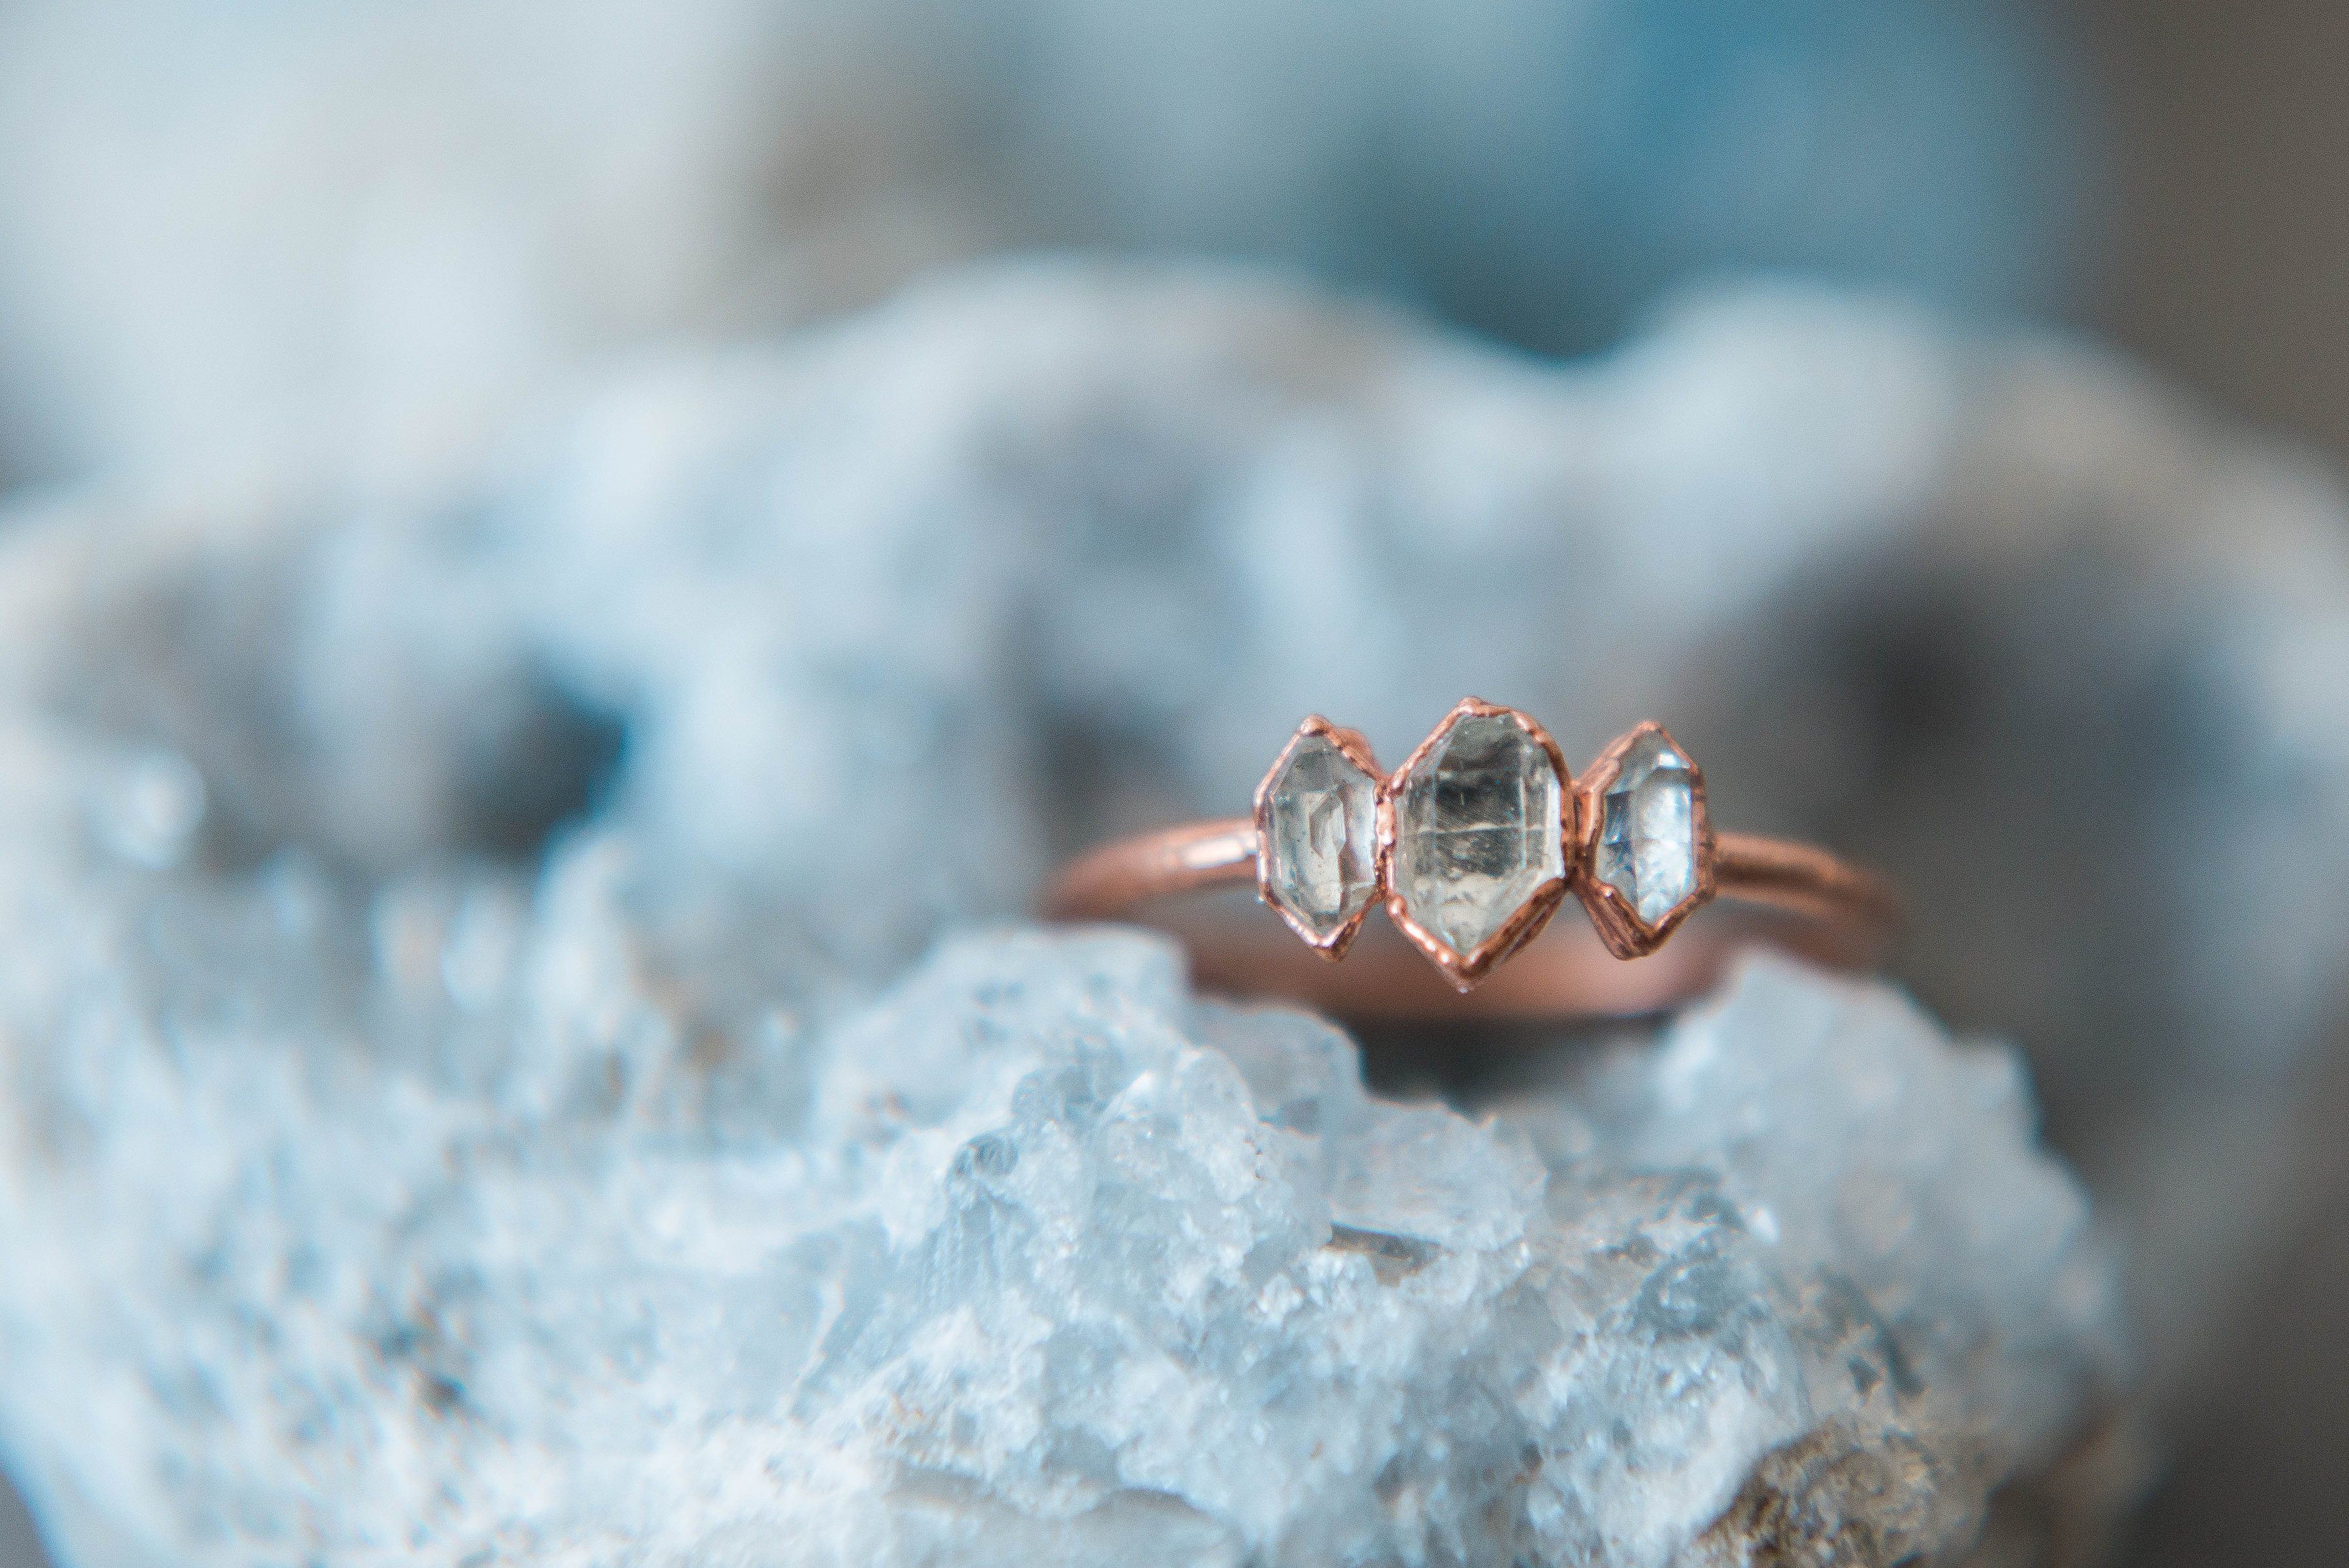 Herkimer diamond ring shot at Haagse Strandhuisjes by a wedding photographer in The Hague